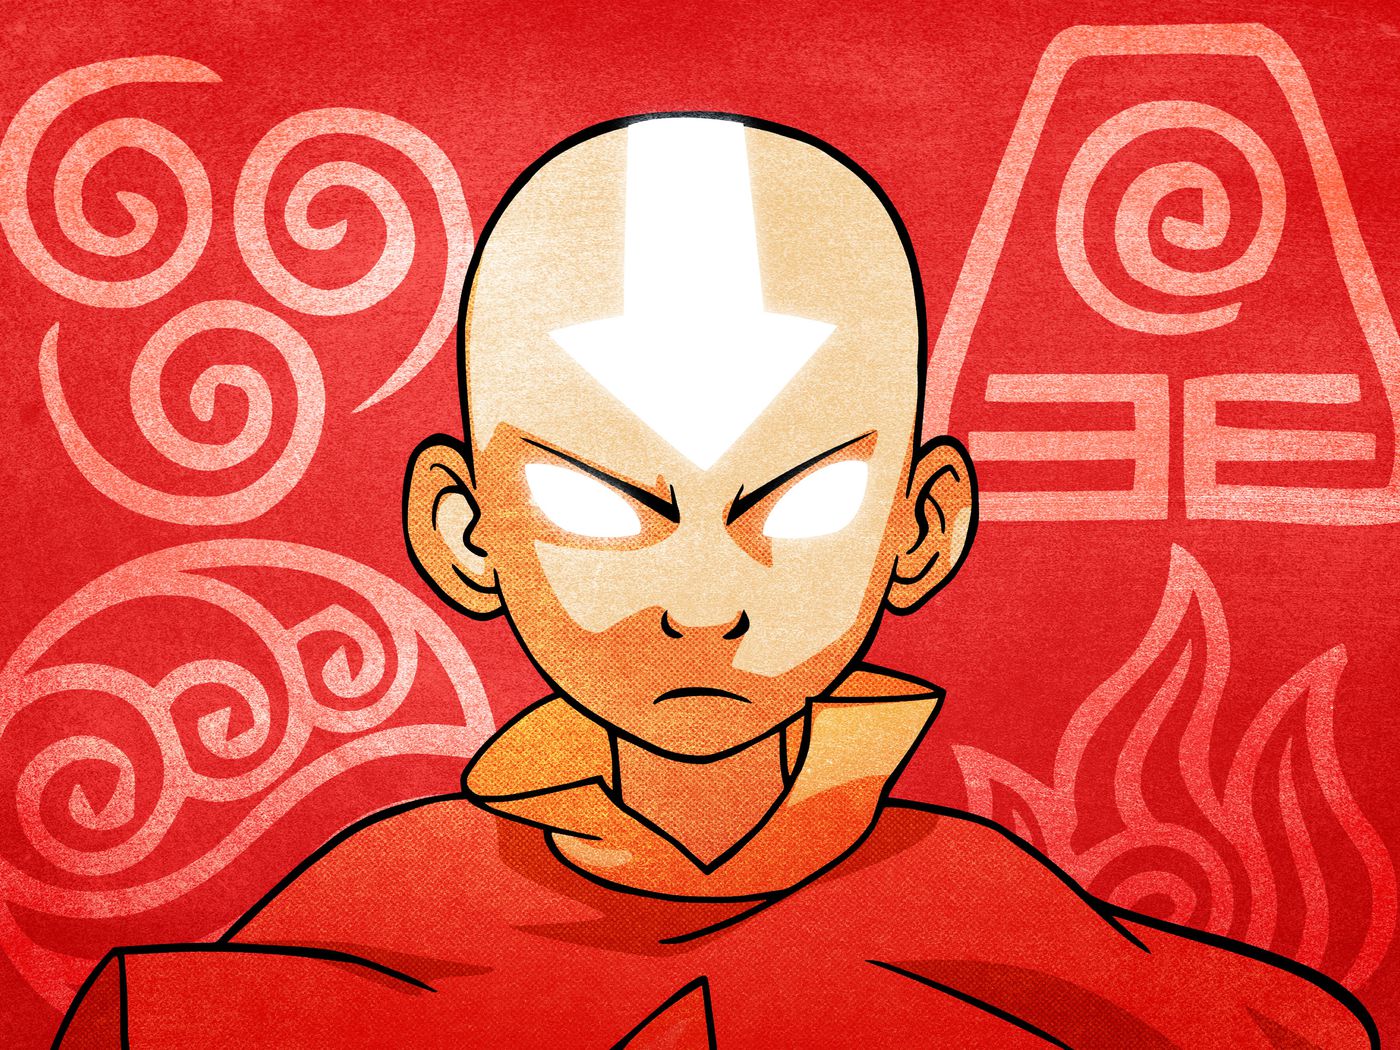 Avatar: The Last Airbender' Still Has Many Lessons to Teach - The Ringer